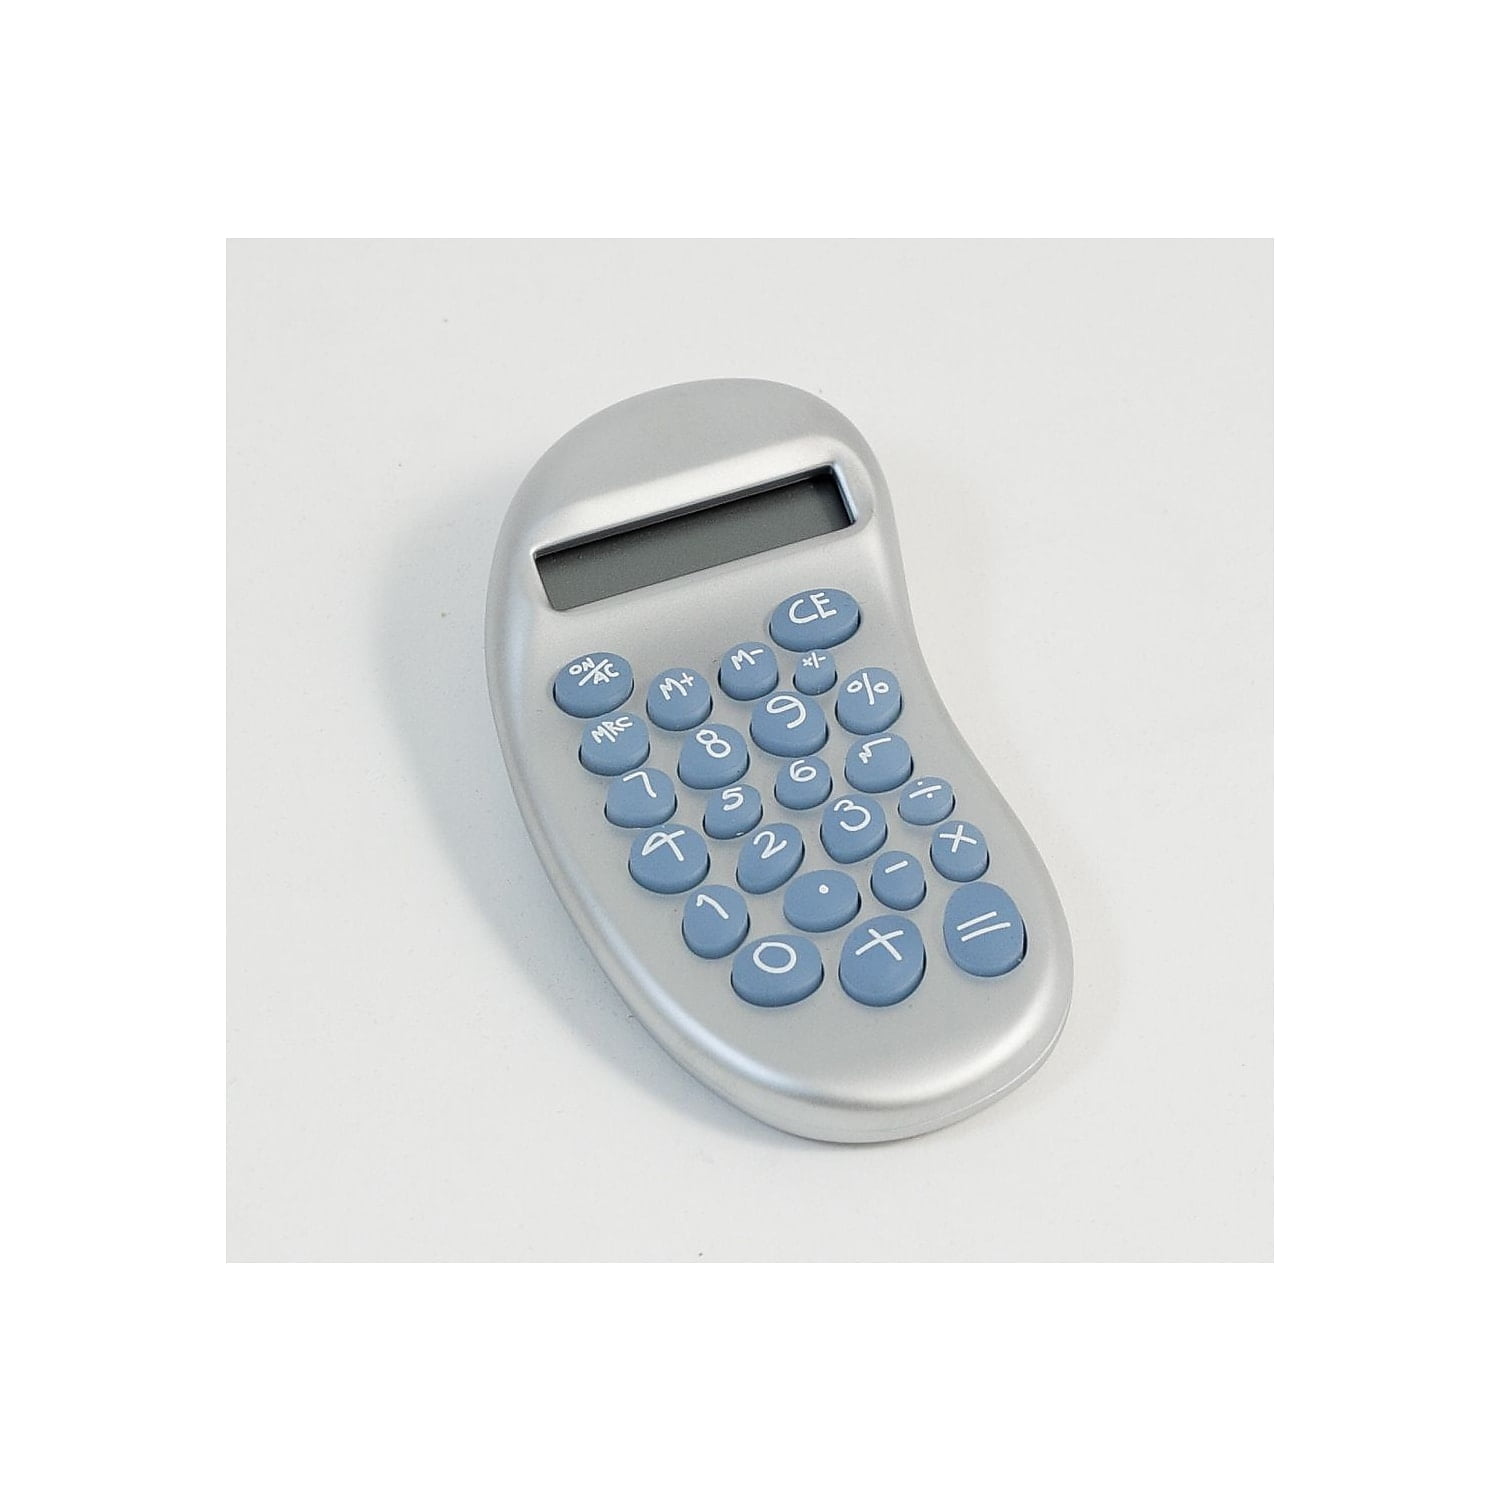 Picture of Bey-Berk International D382 Ergonomic Calculator with Satinized Pearl Finish - Silver